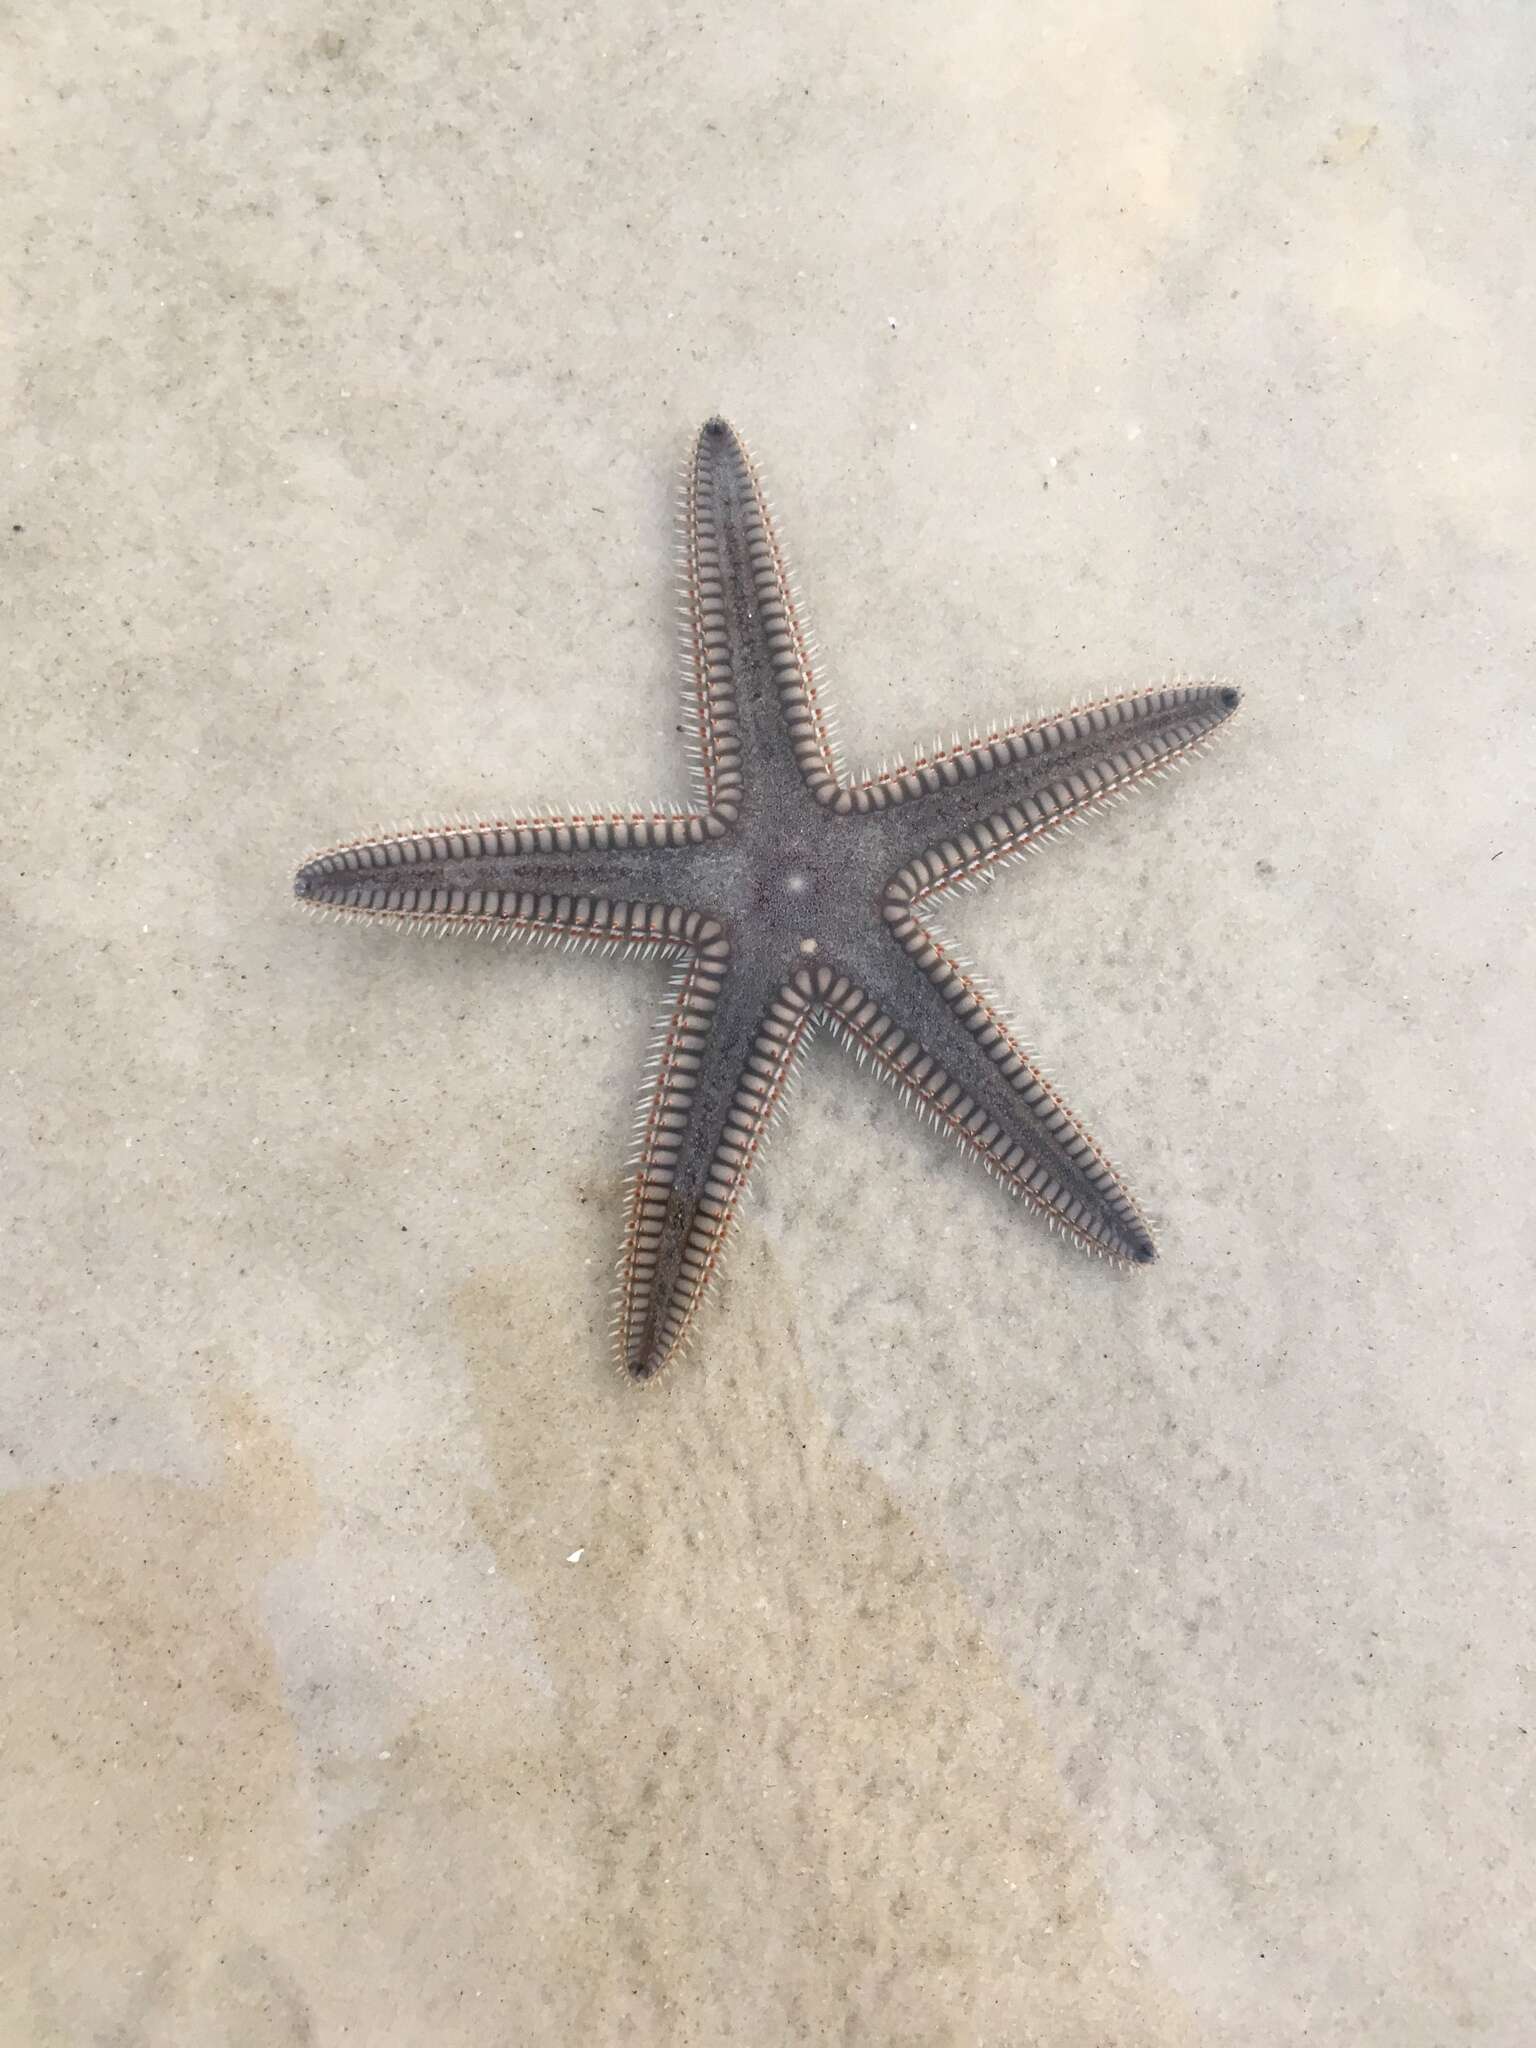 Image of Two-spined sea star